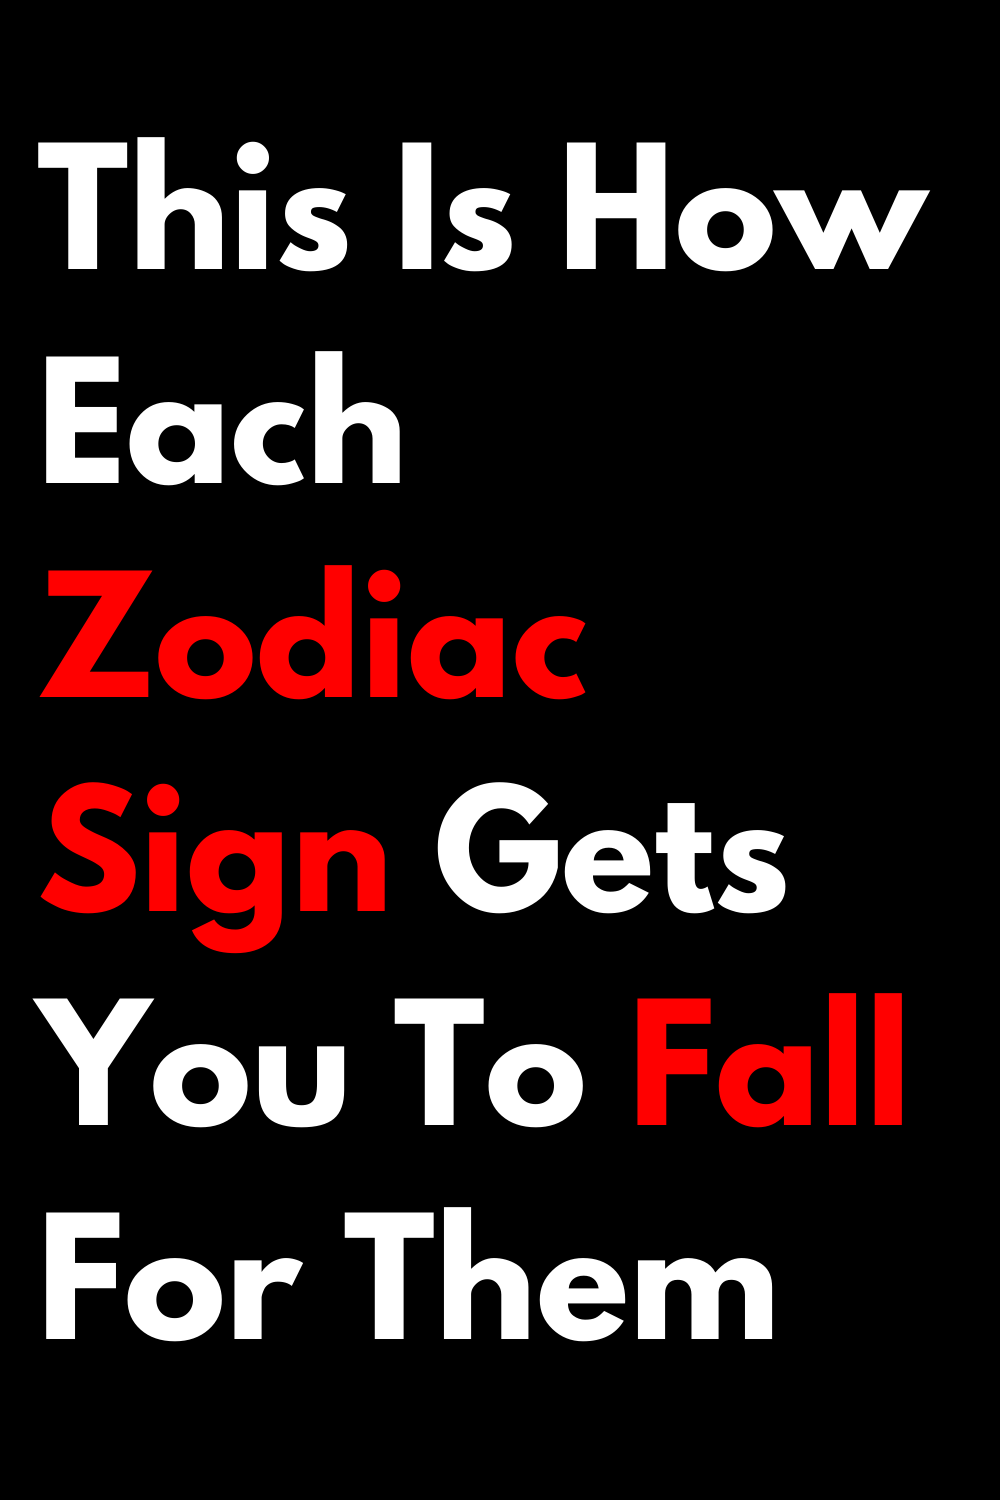 This Is How Each Zodiac Sign Gets You To Fall For Them